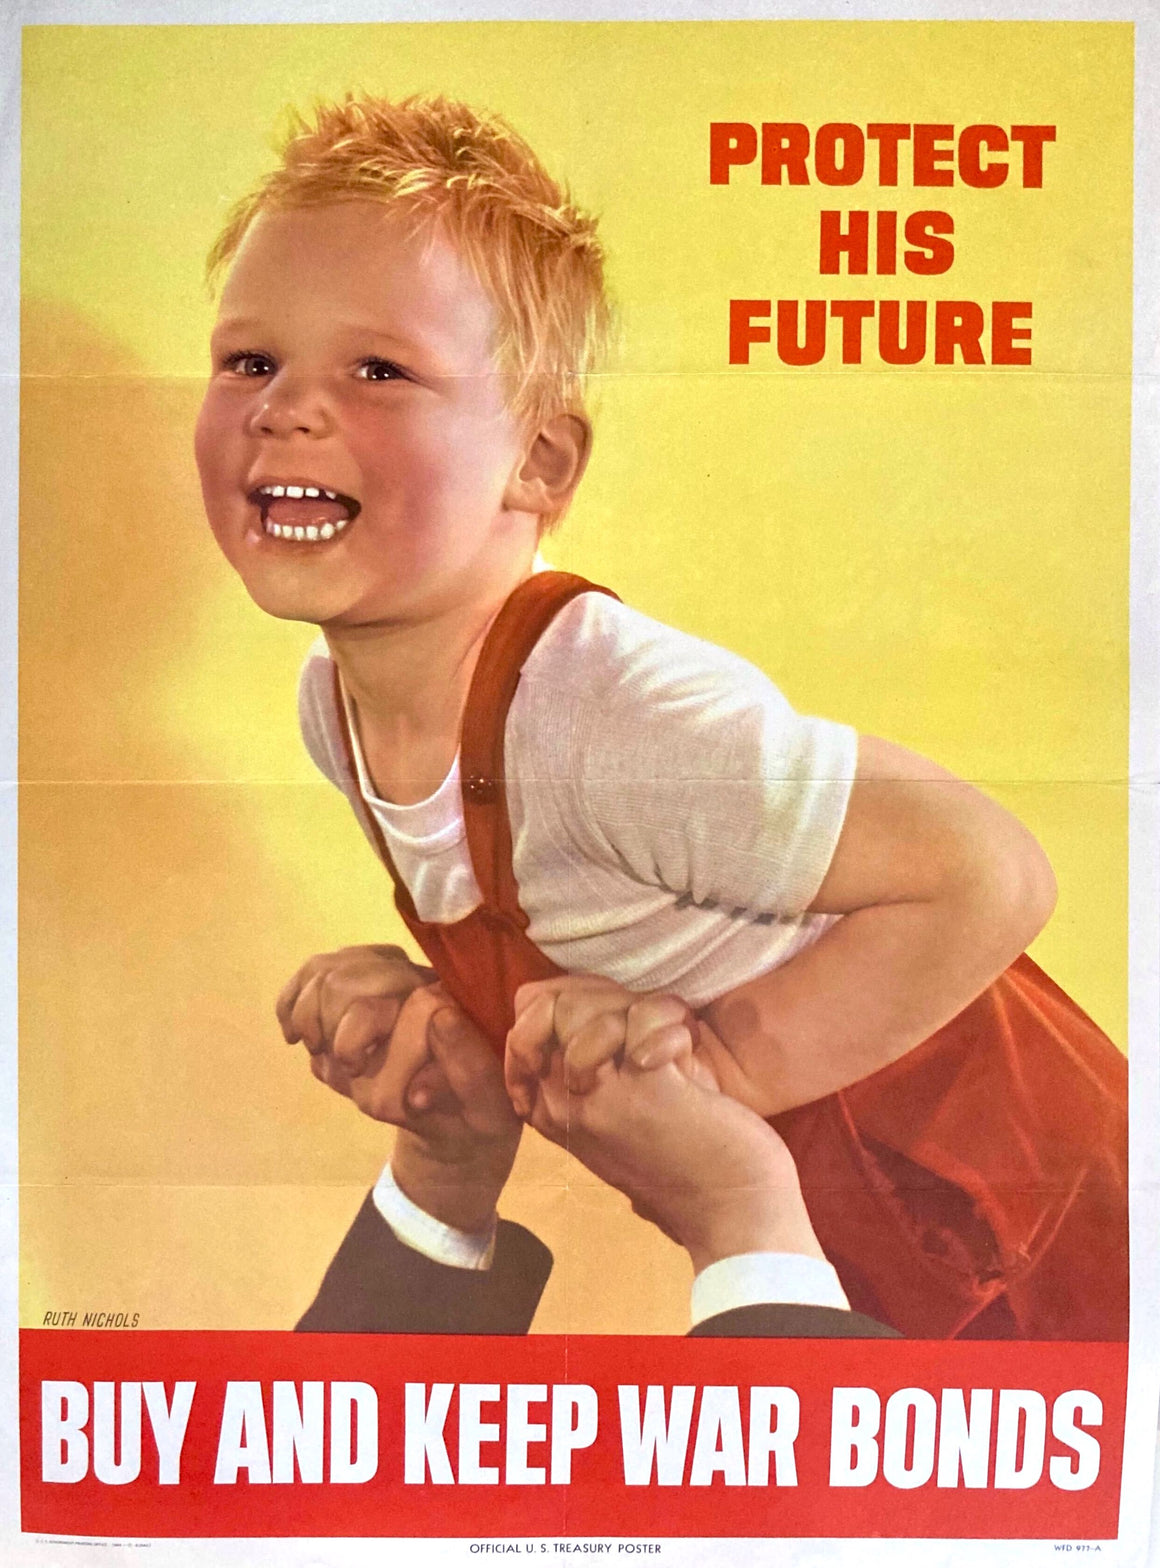 "Protect His Future. Buy and Keep War Bonds." Vintage WWII Poster by Ruth Nichols, 1944